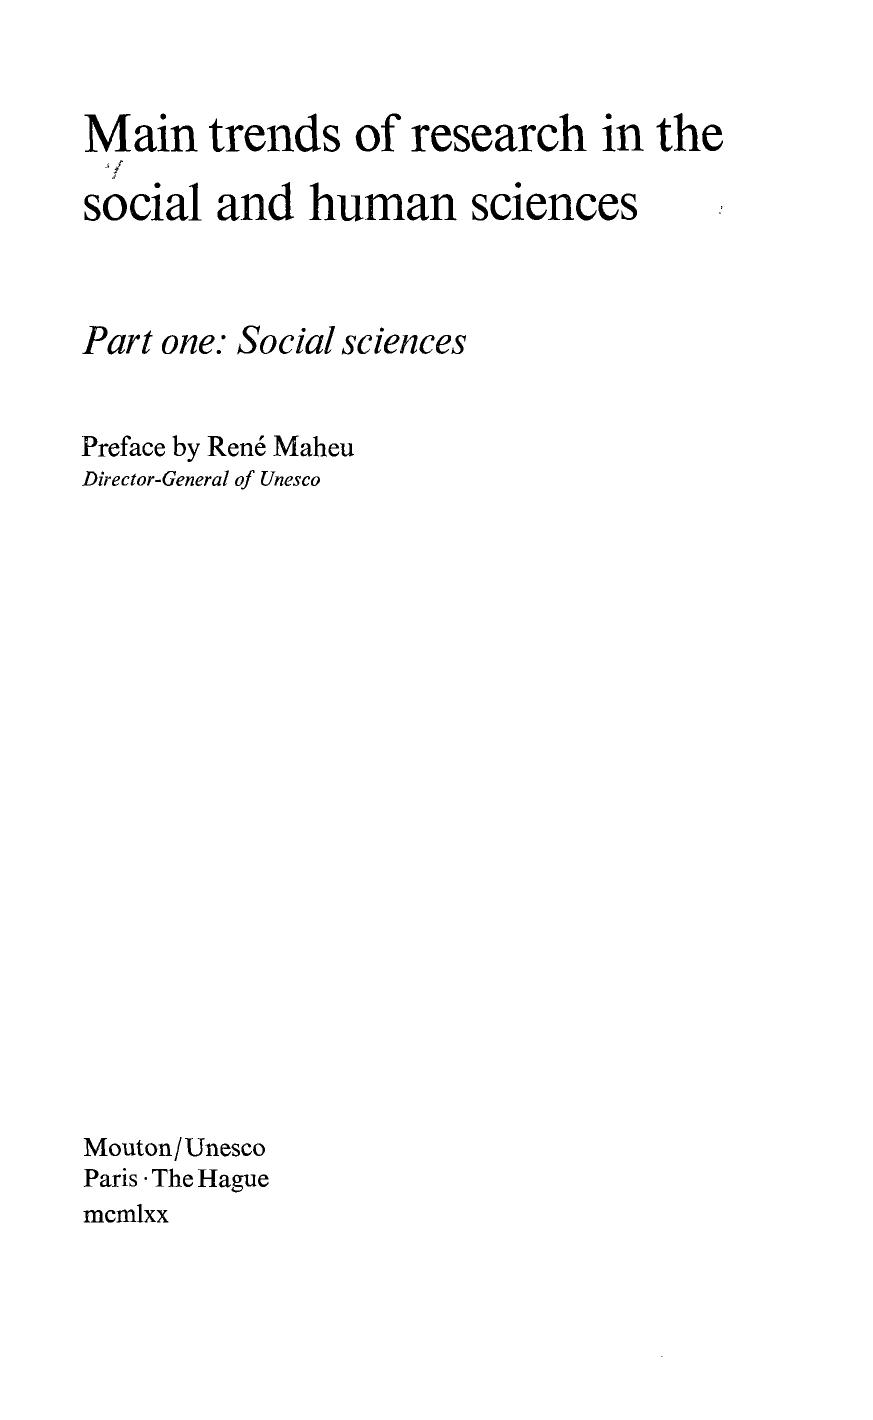 Main trends of research in the social and human sciences, pt. 1: The Social sciences; 1970